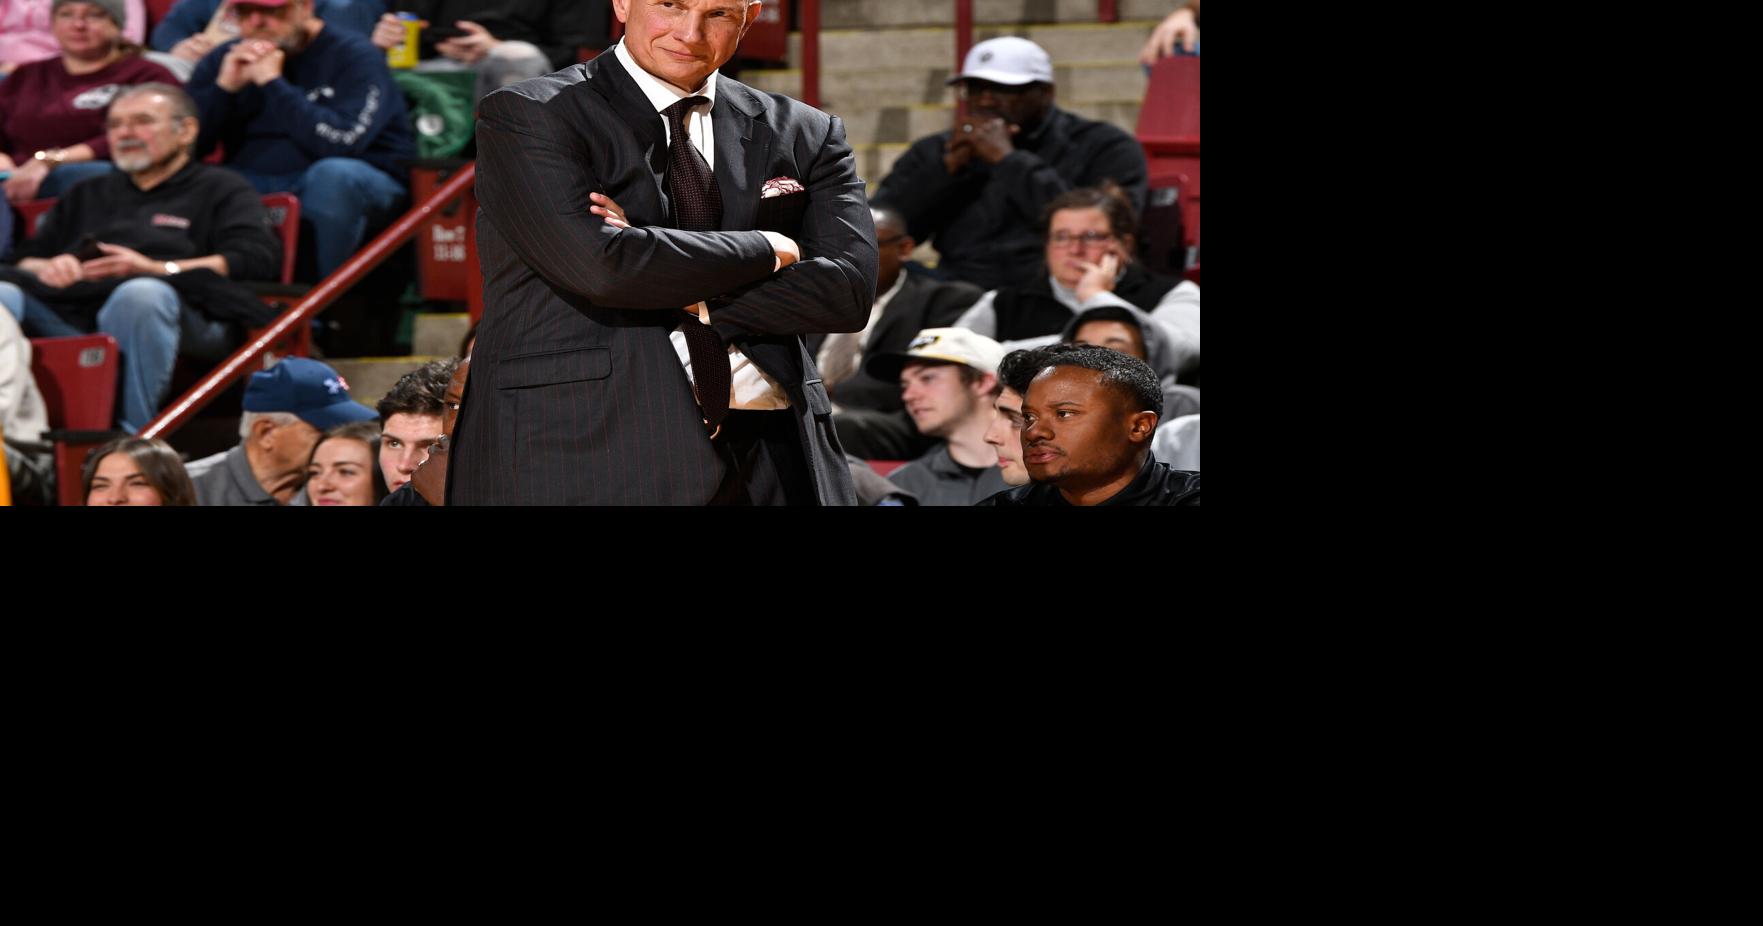 From left to right, South Carolina assistant coach assistant coach